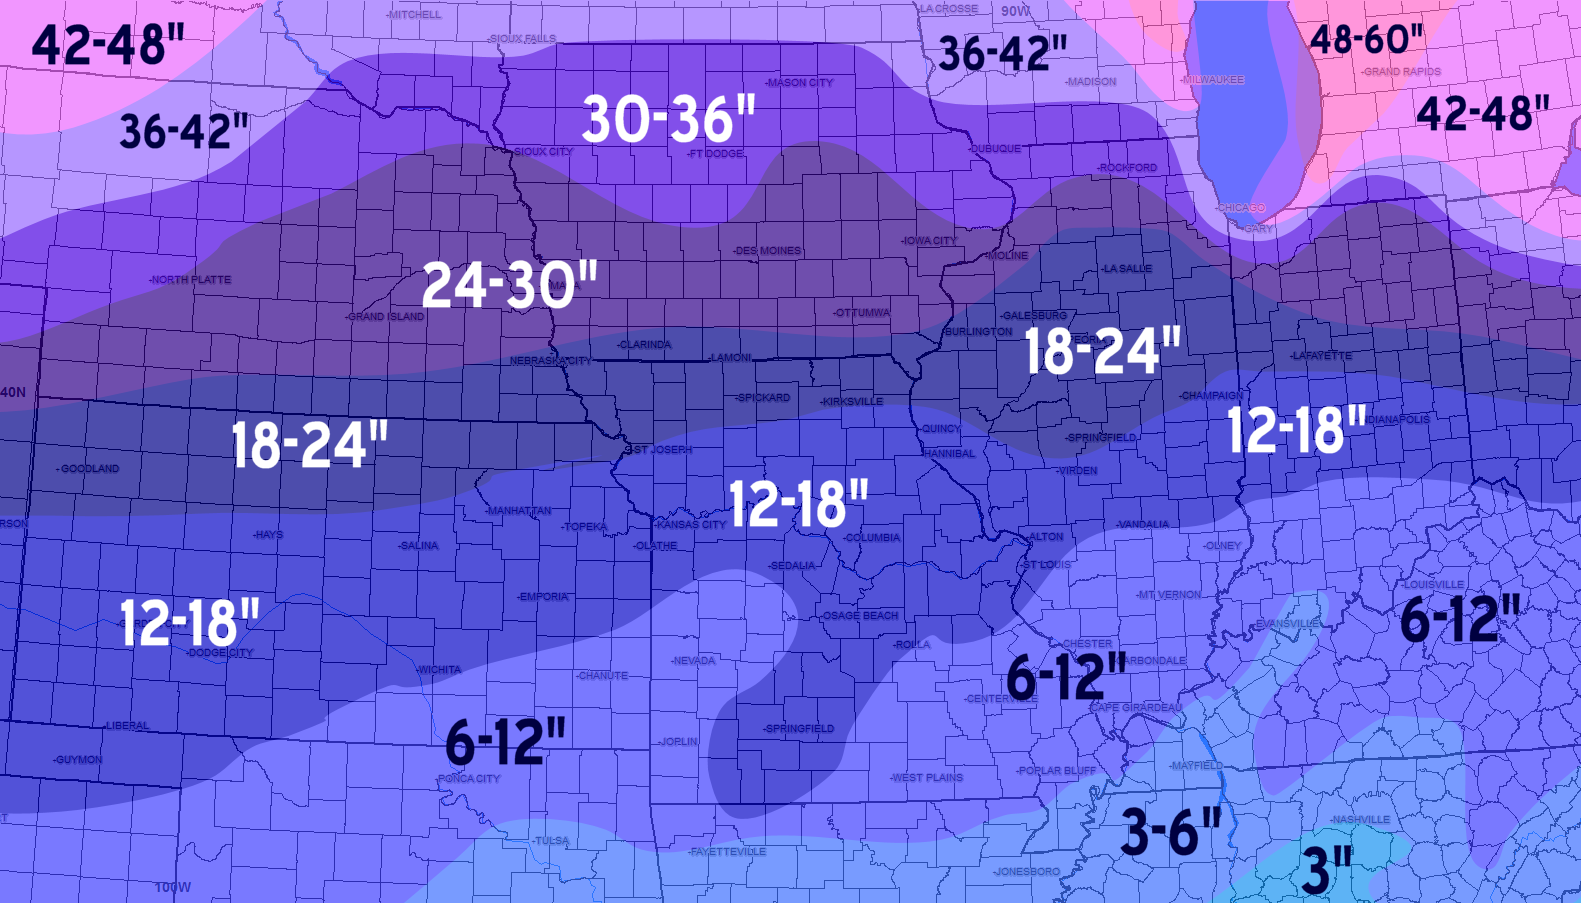 Winter Weather in our part of the Midwest | Missouri/S Illinois Weather Center Blog